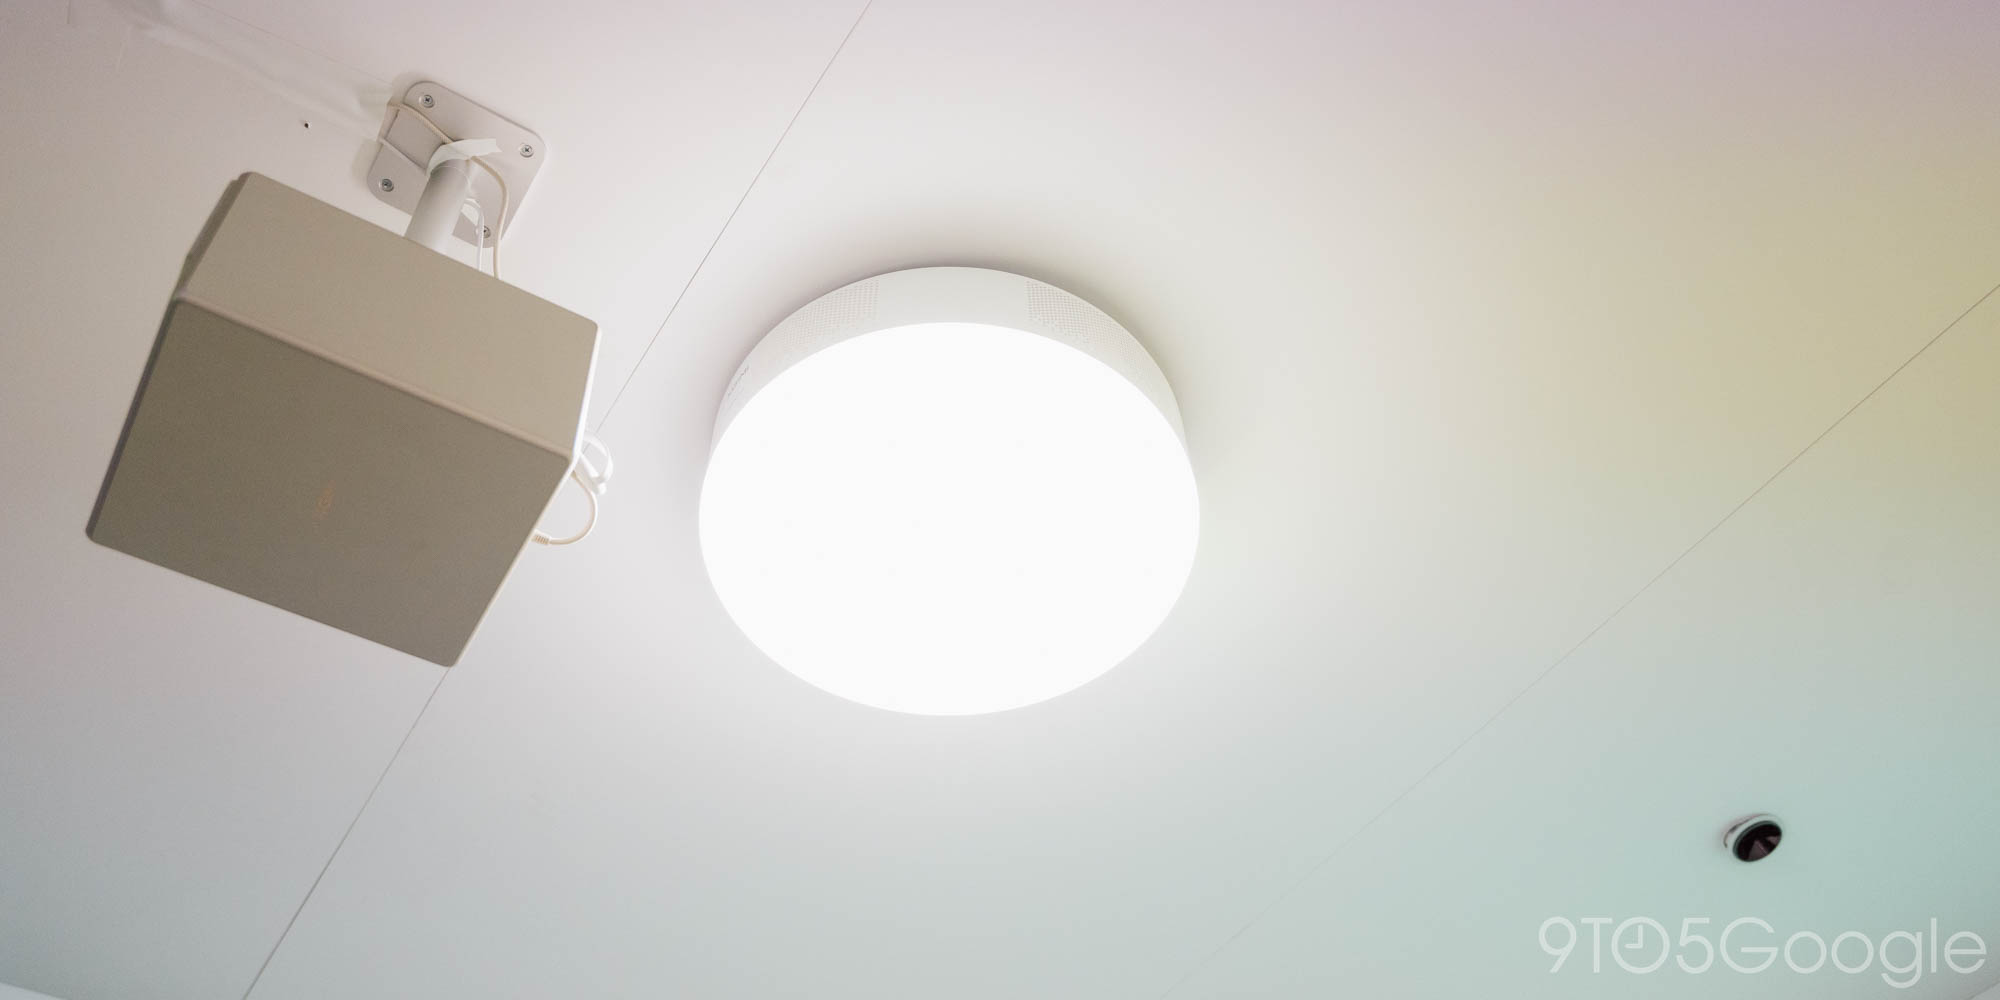 XGIMI launches a clever projector hidden in a ceiling light, and a